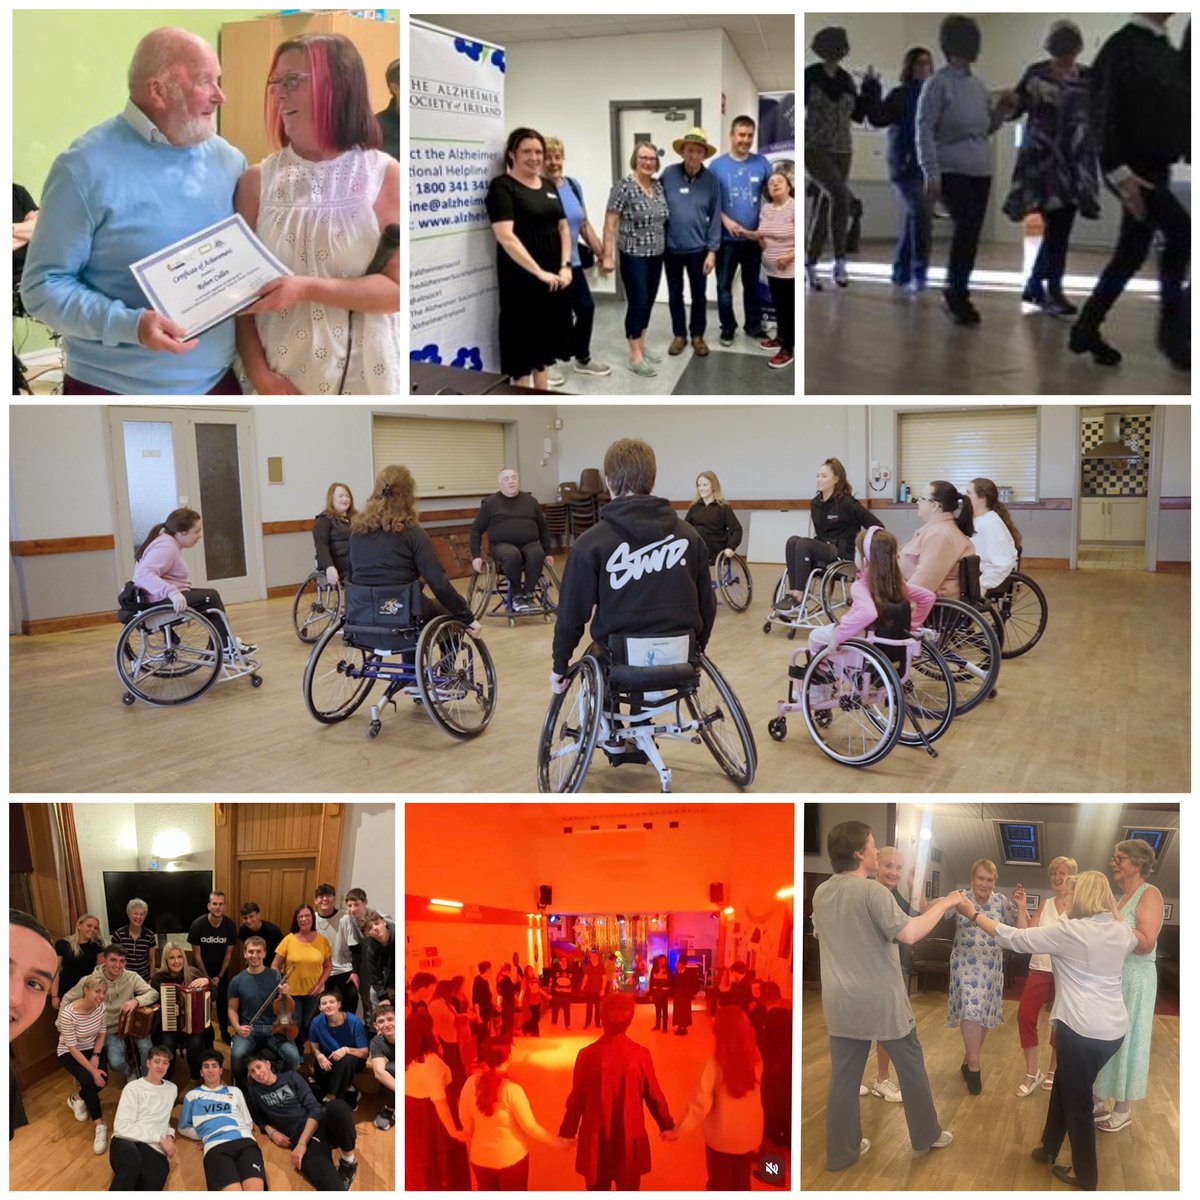 🌟 CERTIFIED INCLUSIVE ADAPTIVE CÉILÍ - LEADER TRAINING🌟 🔥 Applications close today🔥 💡No experience? No problem!💡 ℹ️ More information: 1drv.ms/b/s!Ap_M7YClT6… 📝 Application form: forms.office.com/r/xAp8ZsdDJn #dementia #wheelchairuser #olderadults #inclusive